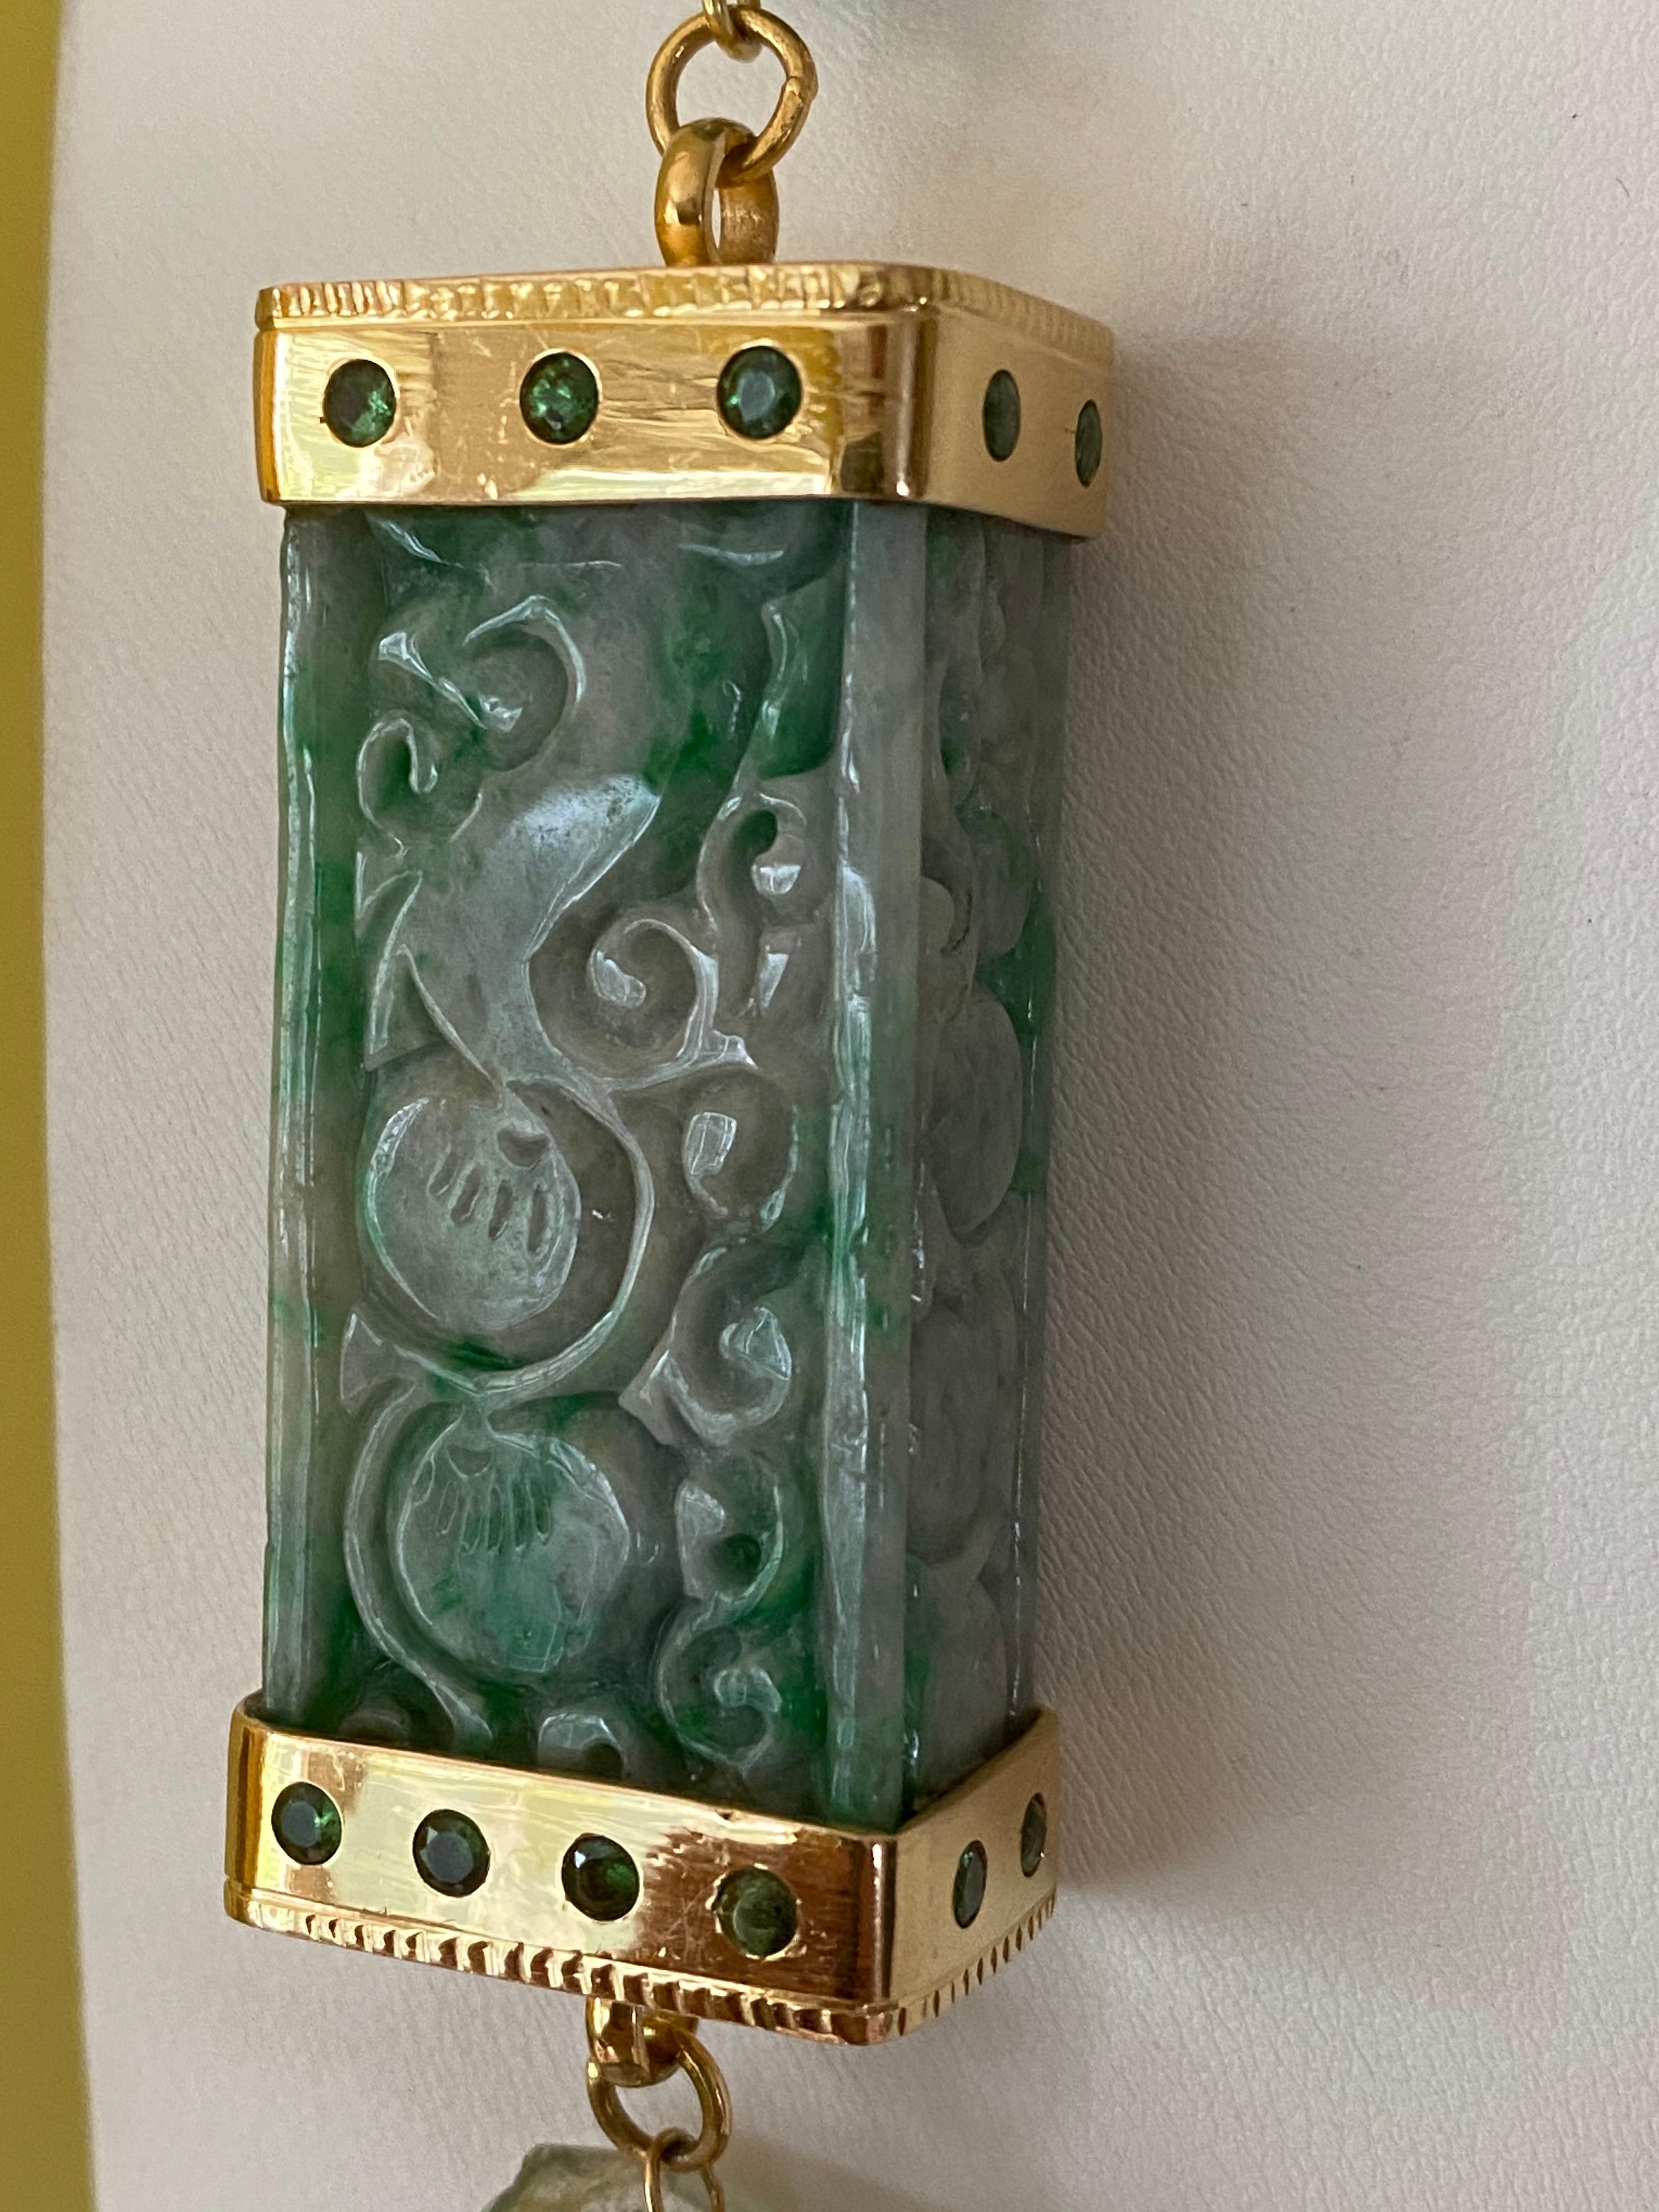 Jane Magon Collections Statement Necklace from the East Meets West Collections features carved Burmese Jade Rectangular Cylinders (one capped in 18 Karat Yellow Gold that is set with Tsavorite Garnets. Another focal point is a flow knot in light